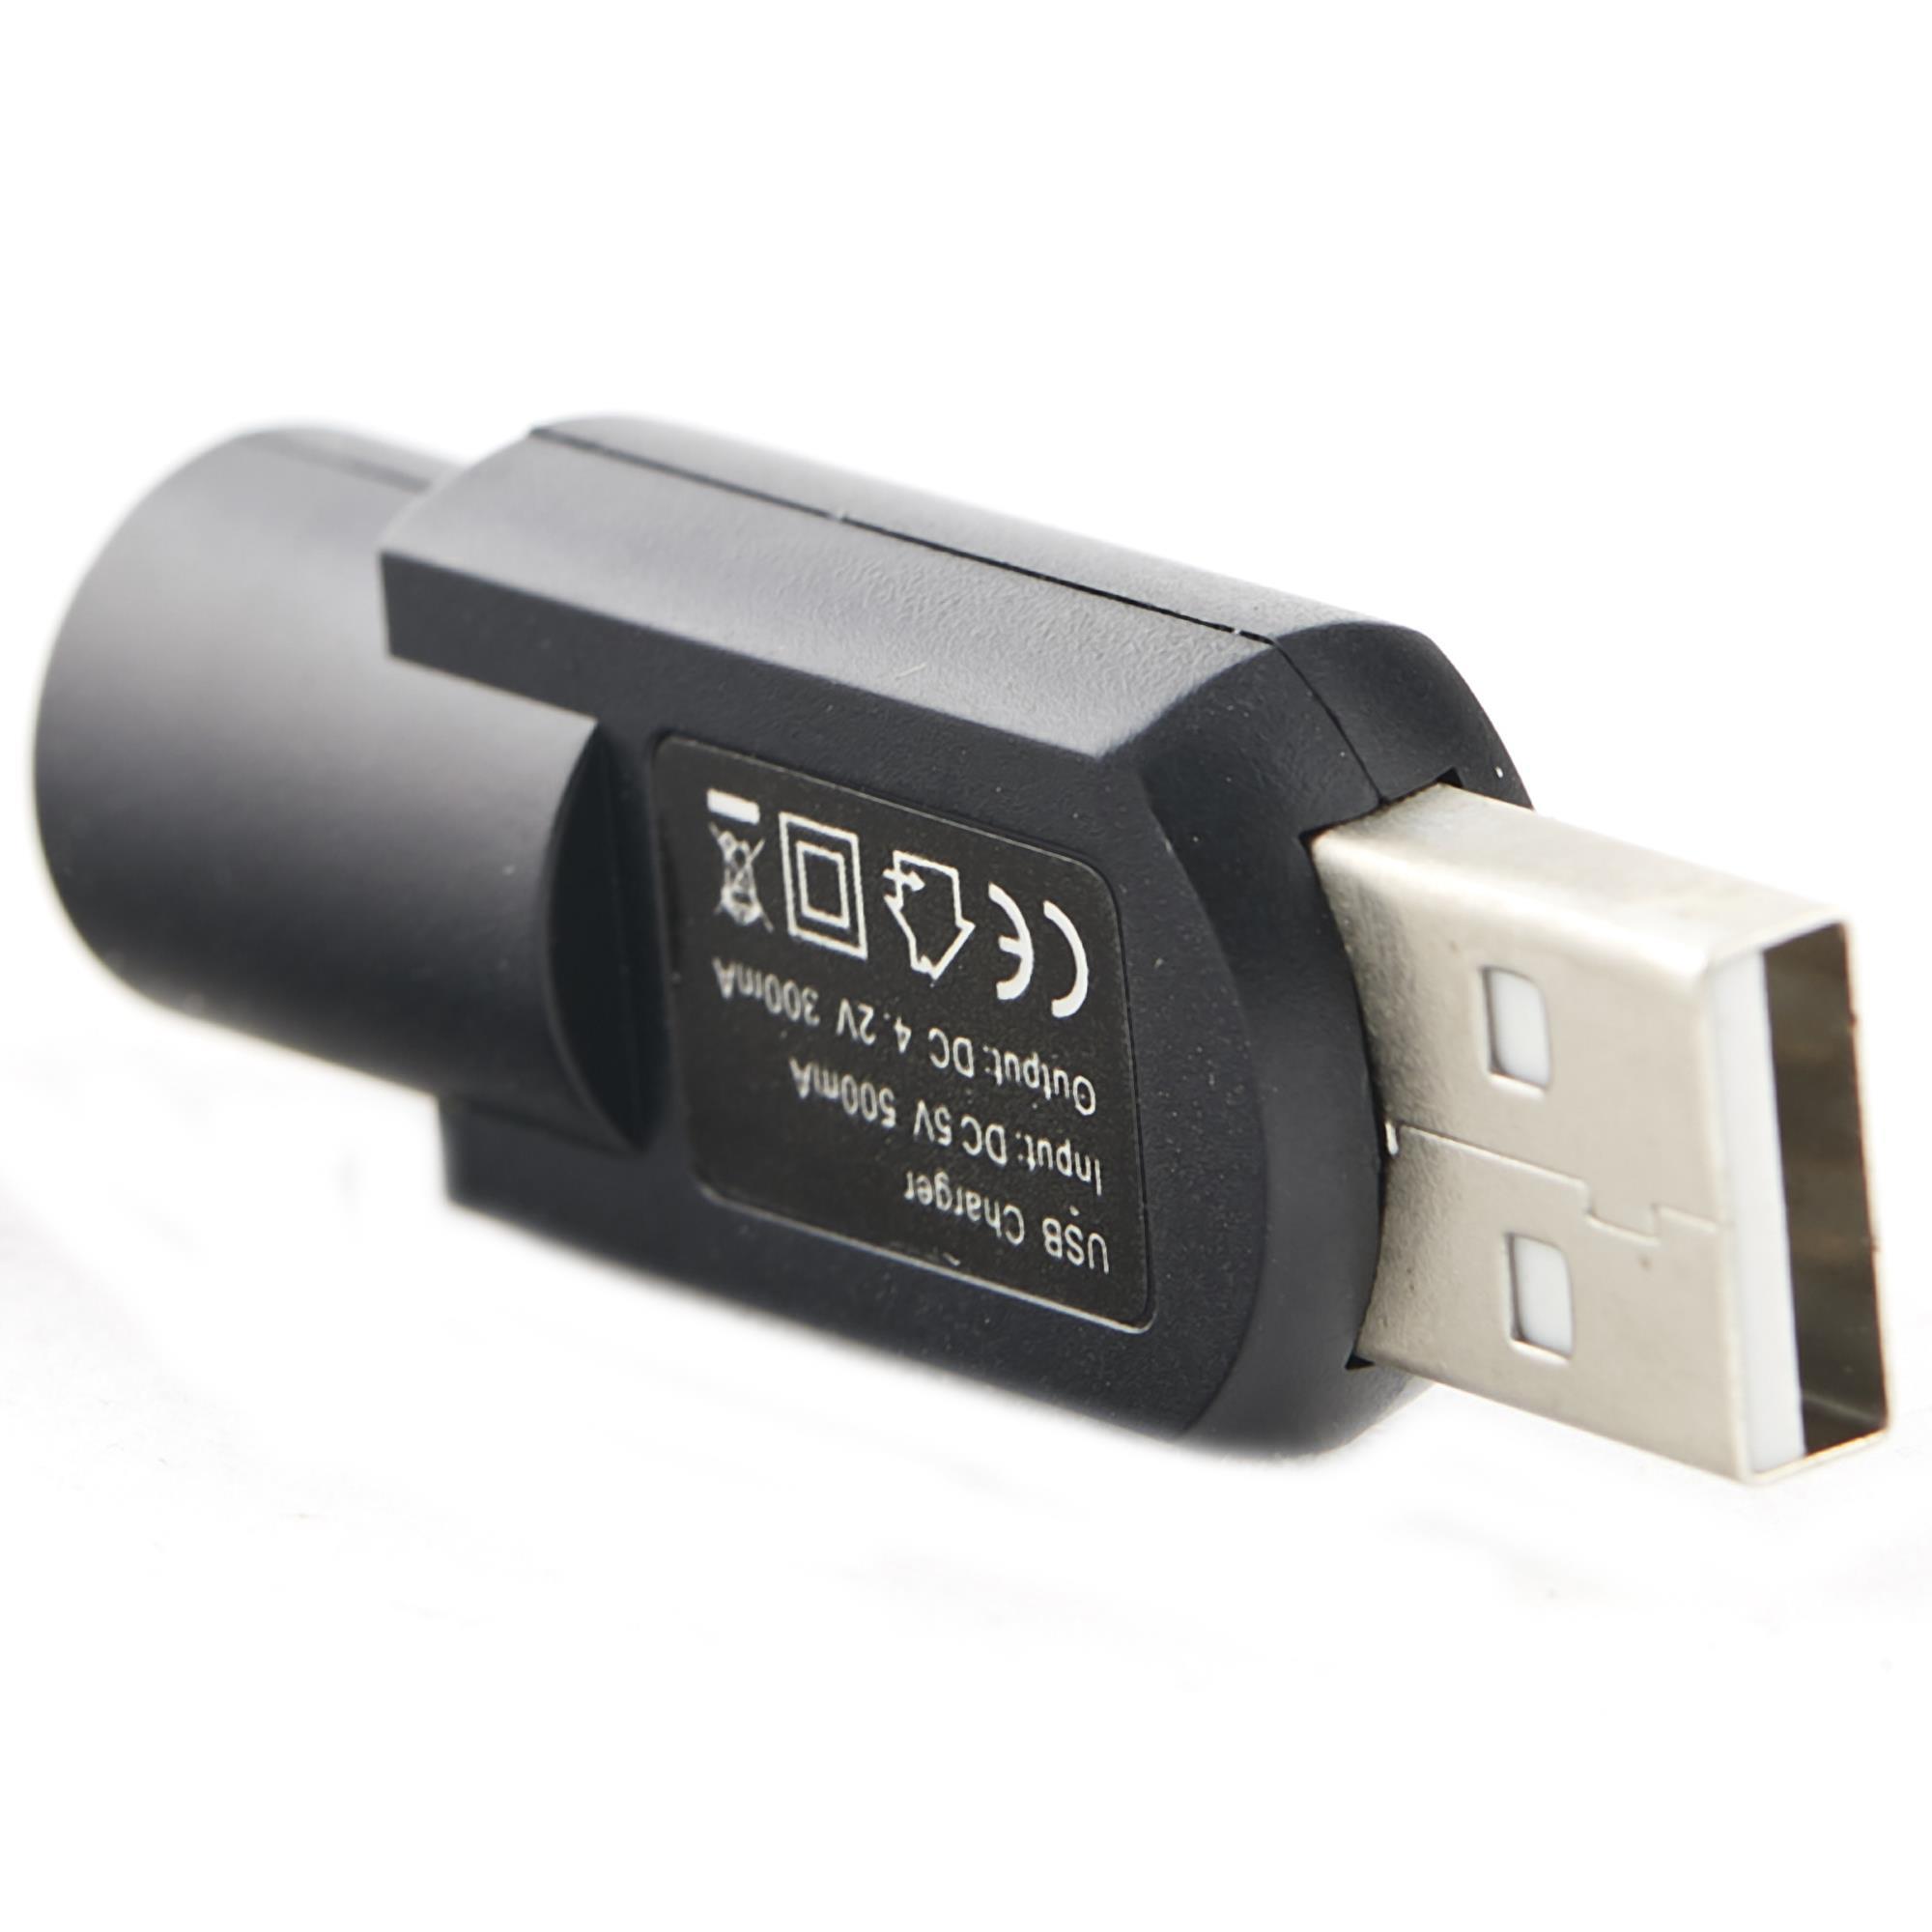 ATMOS CORDLESS USB CHARGER